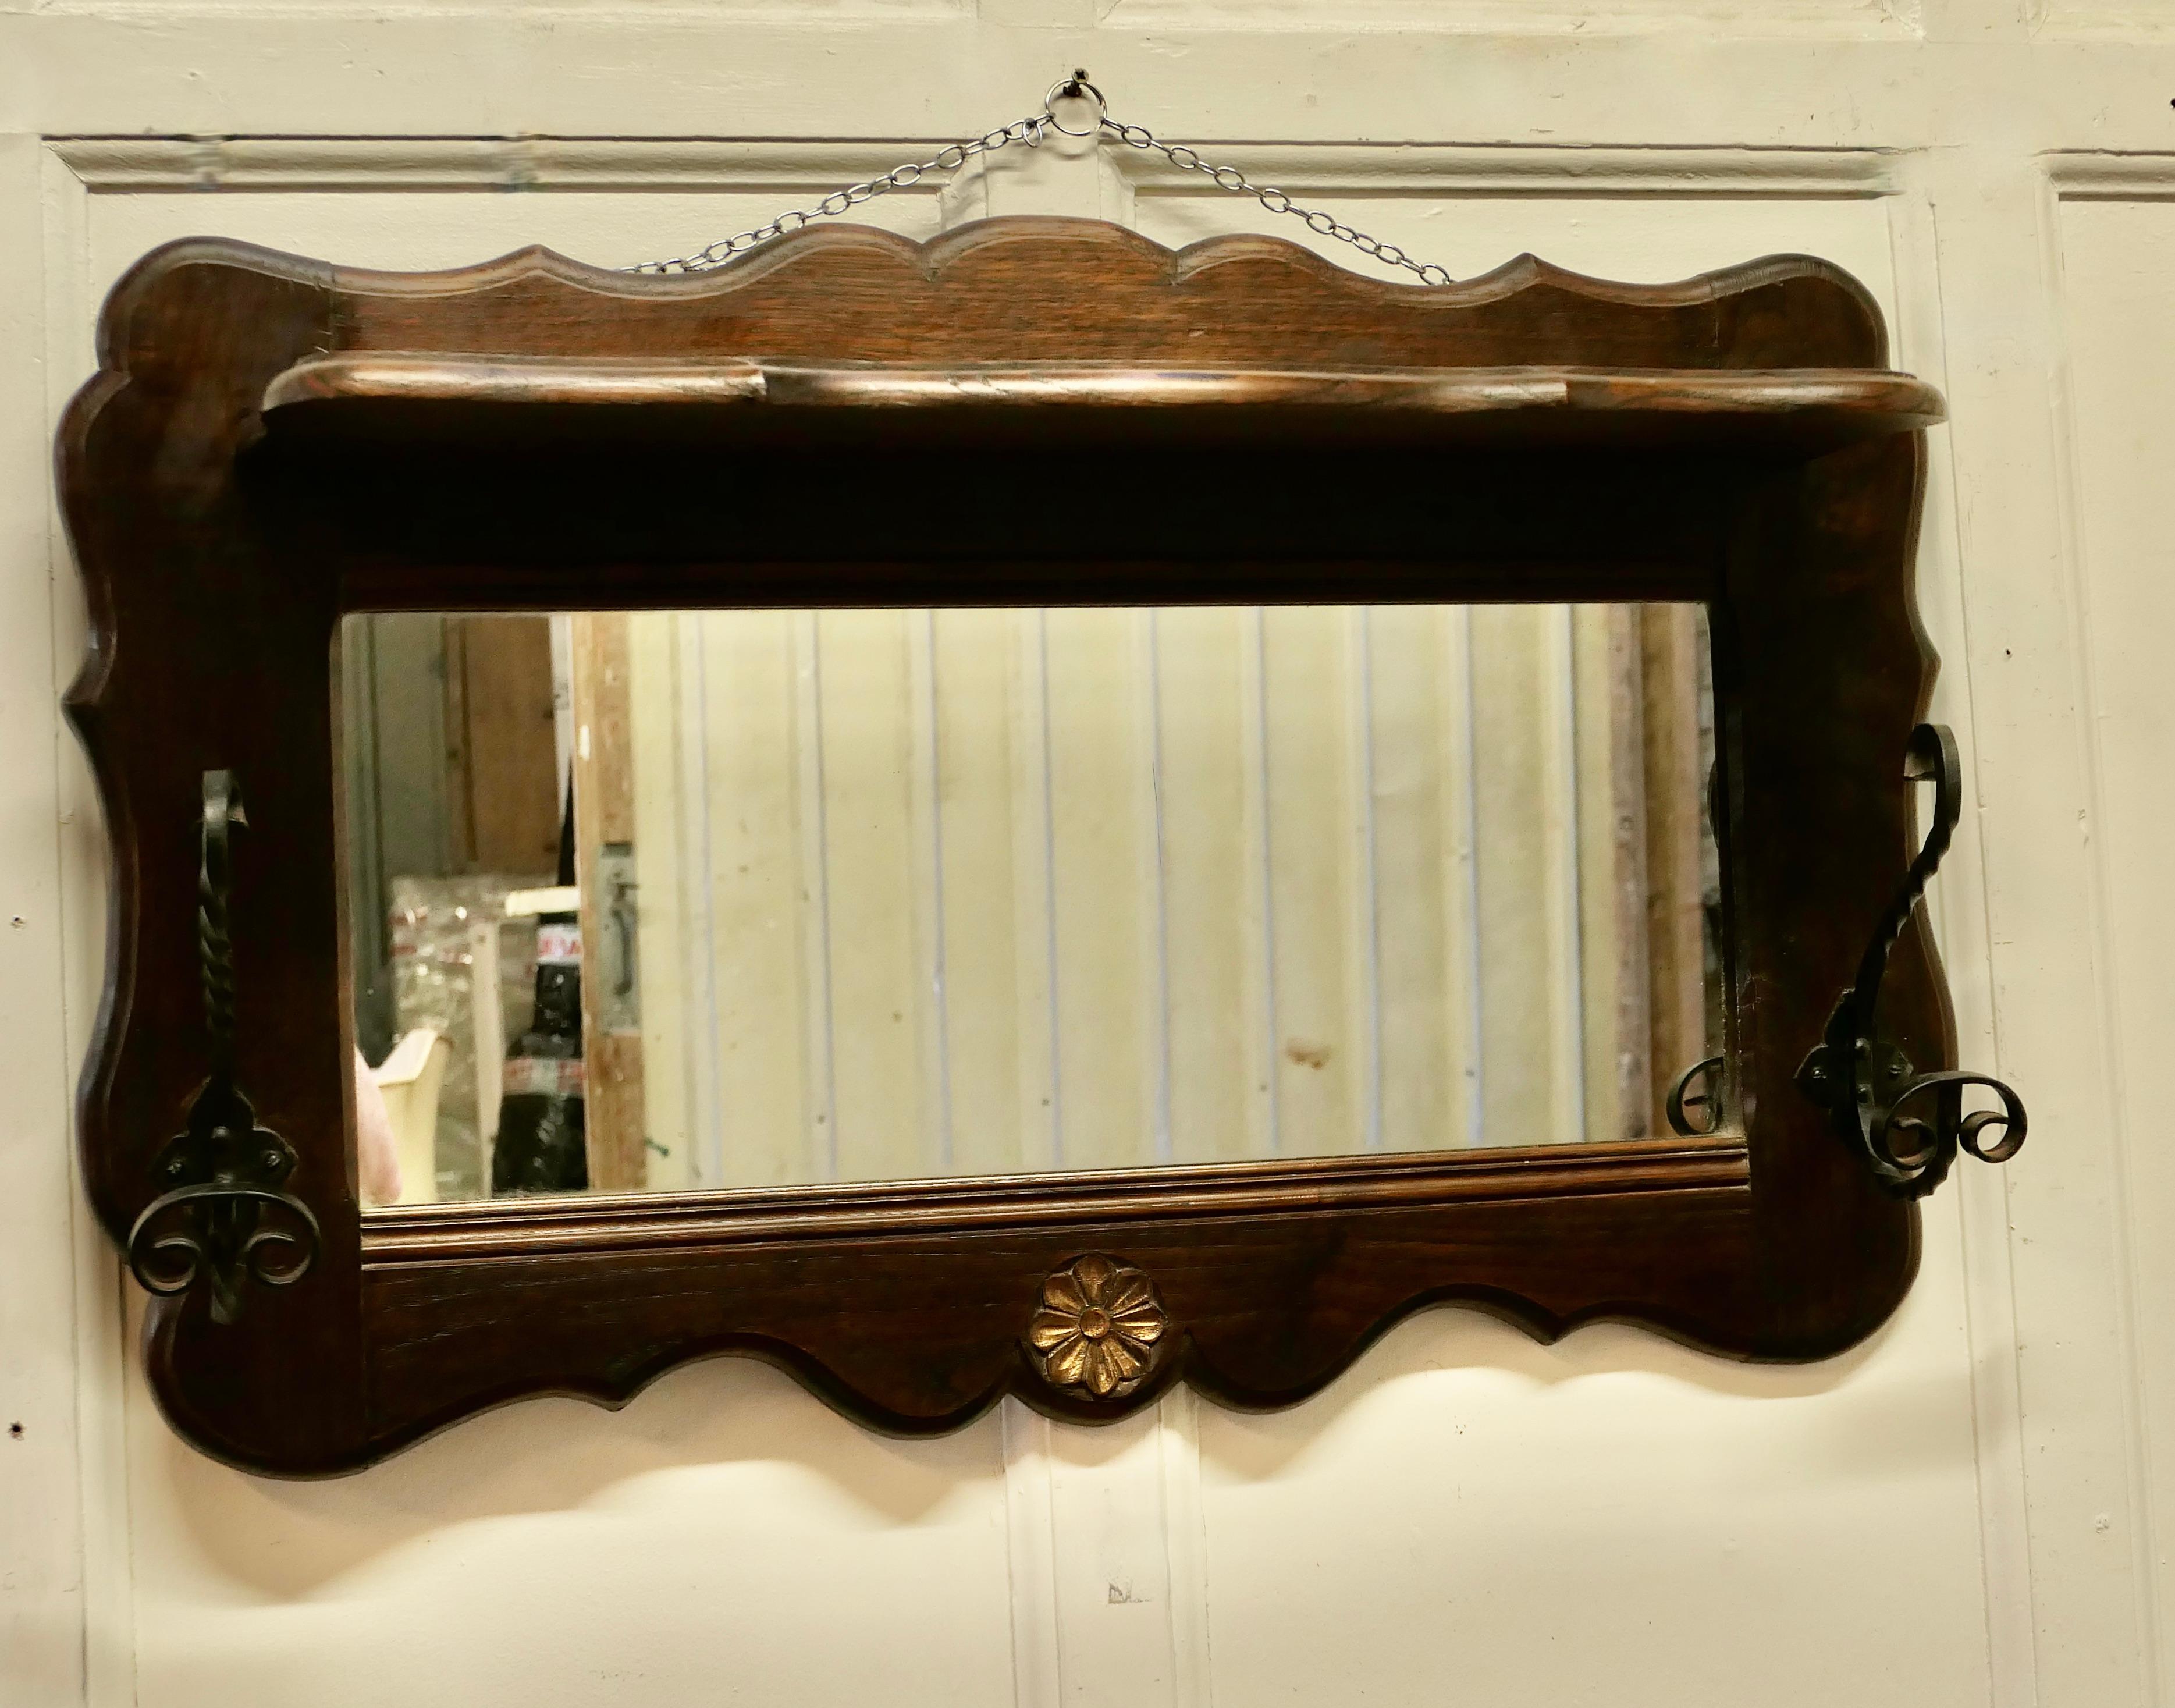 French oak coat and hat rack with shelf and mirror.

The rack is made in solid oak, it has a hat shelf at the top and a mirror below and beneath these are 2 large S shaped blacksmith made double wrought iron coat hooks, good for coats or